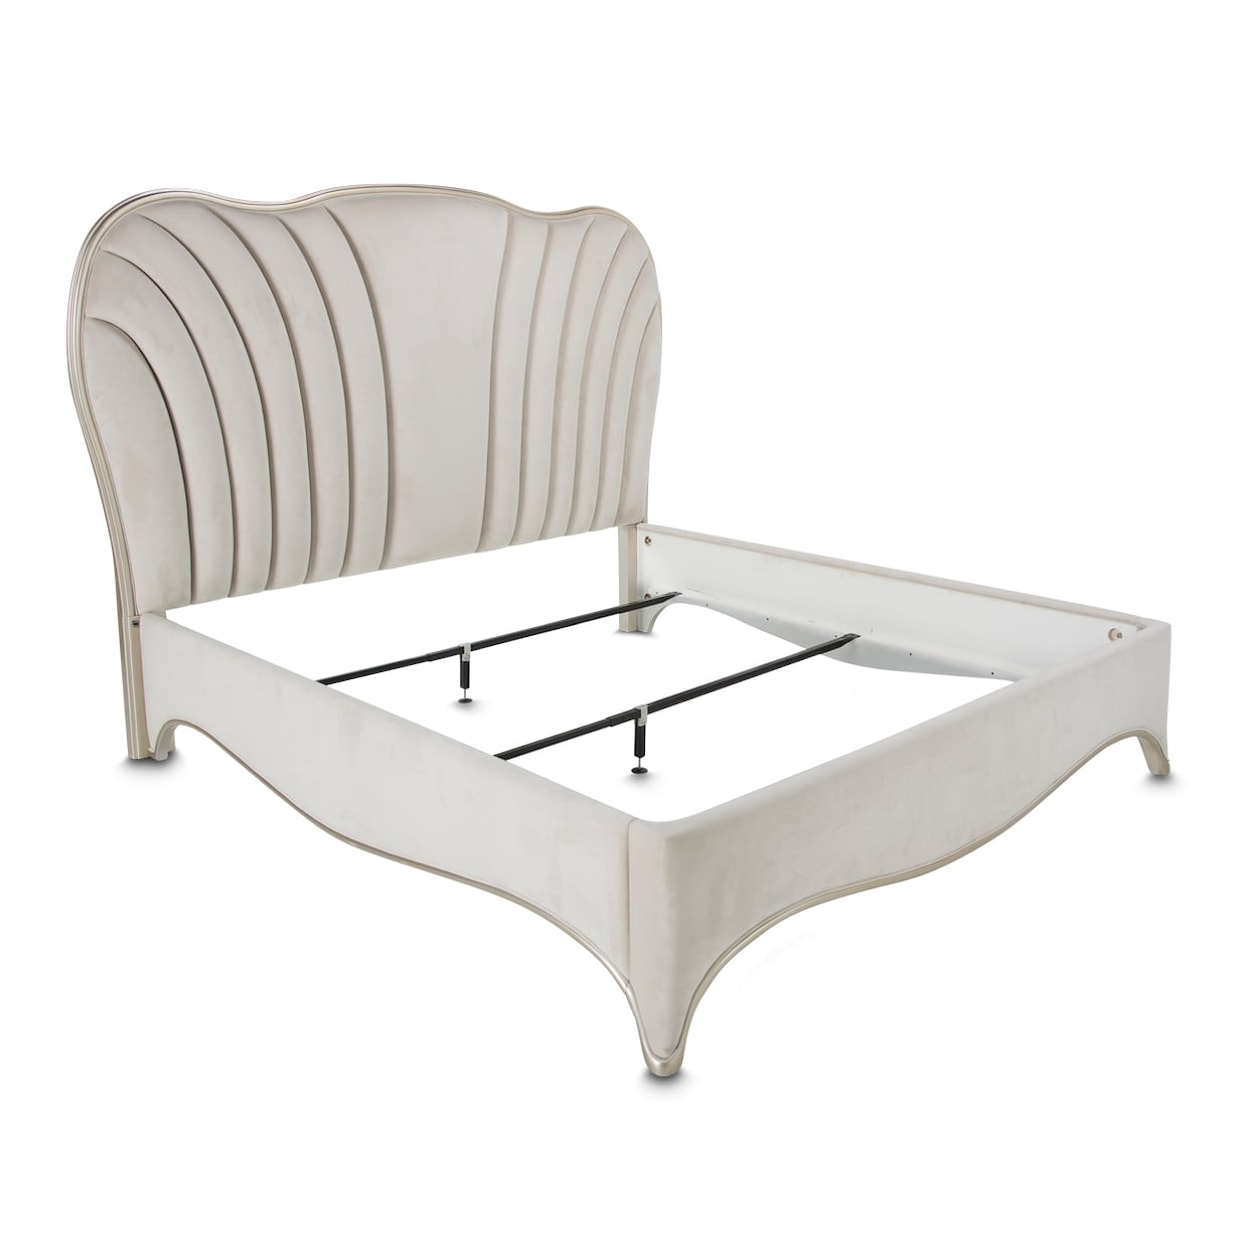 Michael Amini London Place Upholstered Queen Scalloped Bed